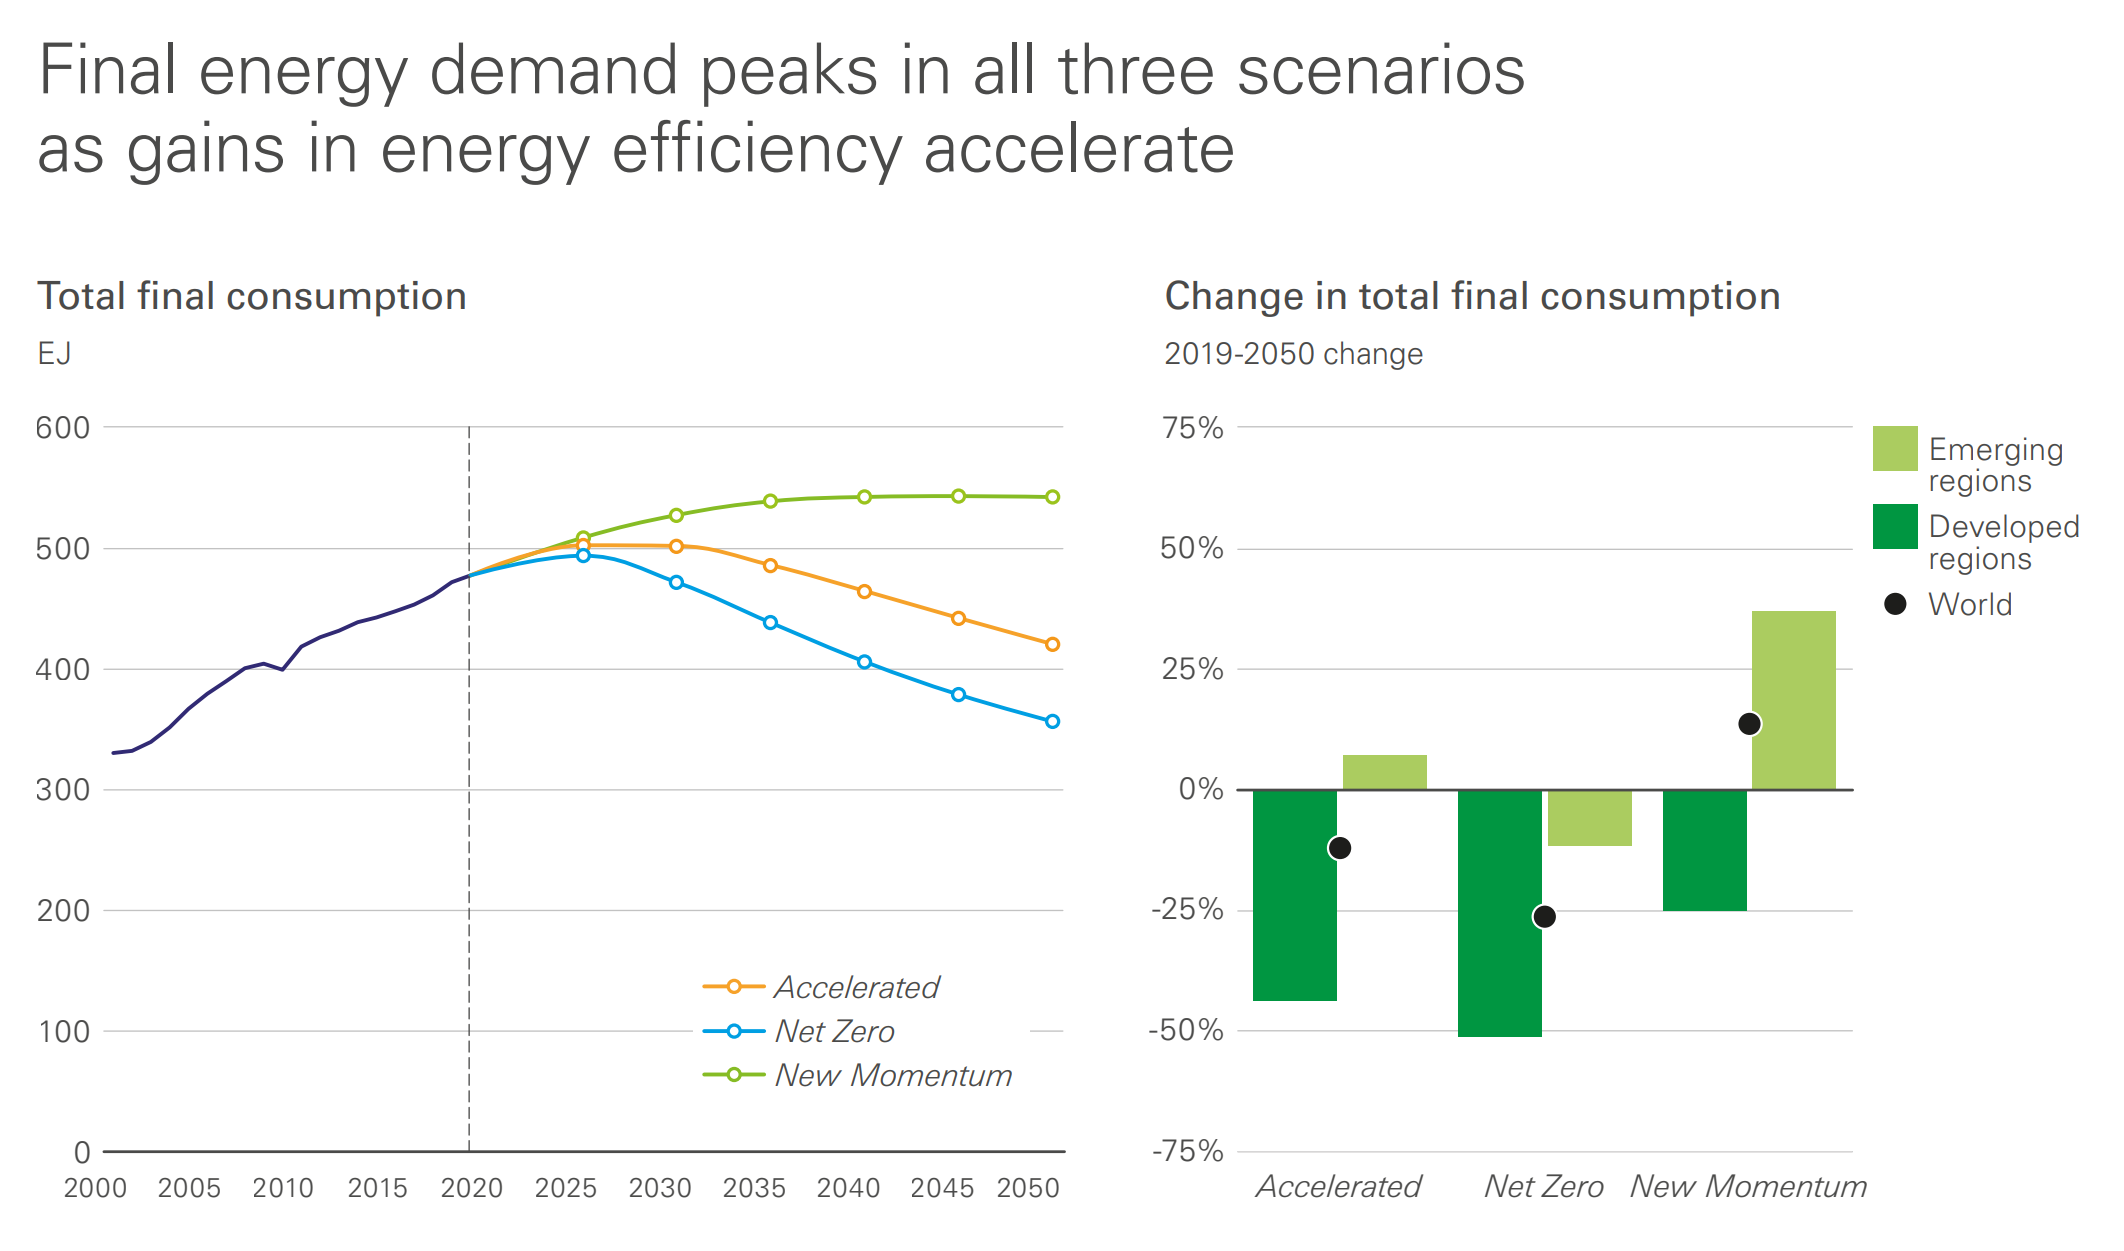 Global energy demand projected to 2050 in three scenarios: Accelerated, Net Zero, and New Momentum. Global energy demand measured at the final point of use (total final consumption, TFC) peaks in all three scenarios as gains in energy efficiency accelerate. TFC peaks in the early 2020s in Net Zero, around 2030 in Accelerated and in the mid-2040s in New Momentum. By 2050, TFC is 10-25 percent lower in Accelerated and Net Zero than 2019 levels and around 15 percent higher in New Momentum. Graphic: BP